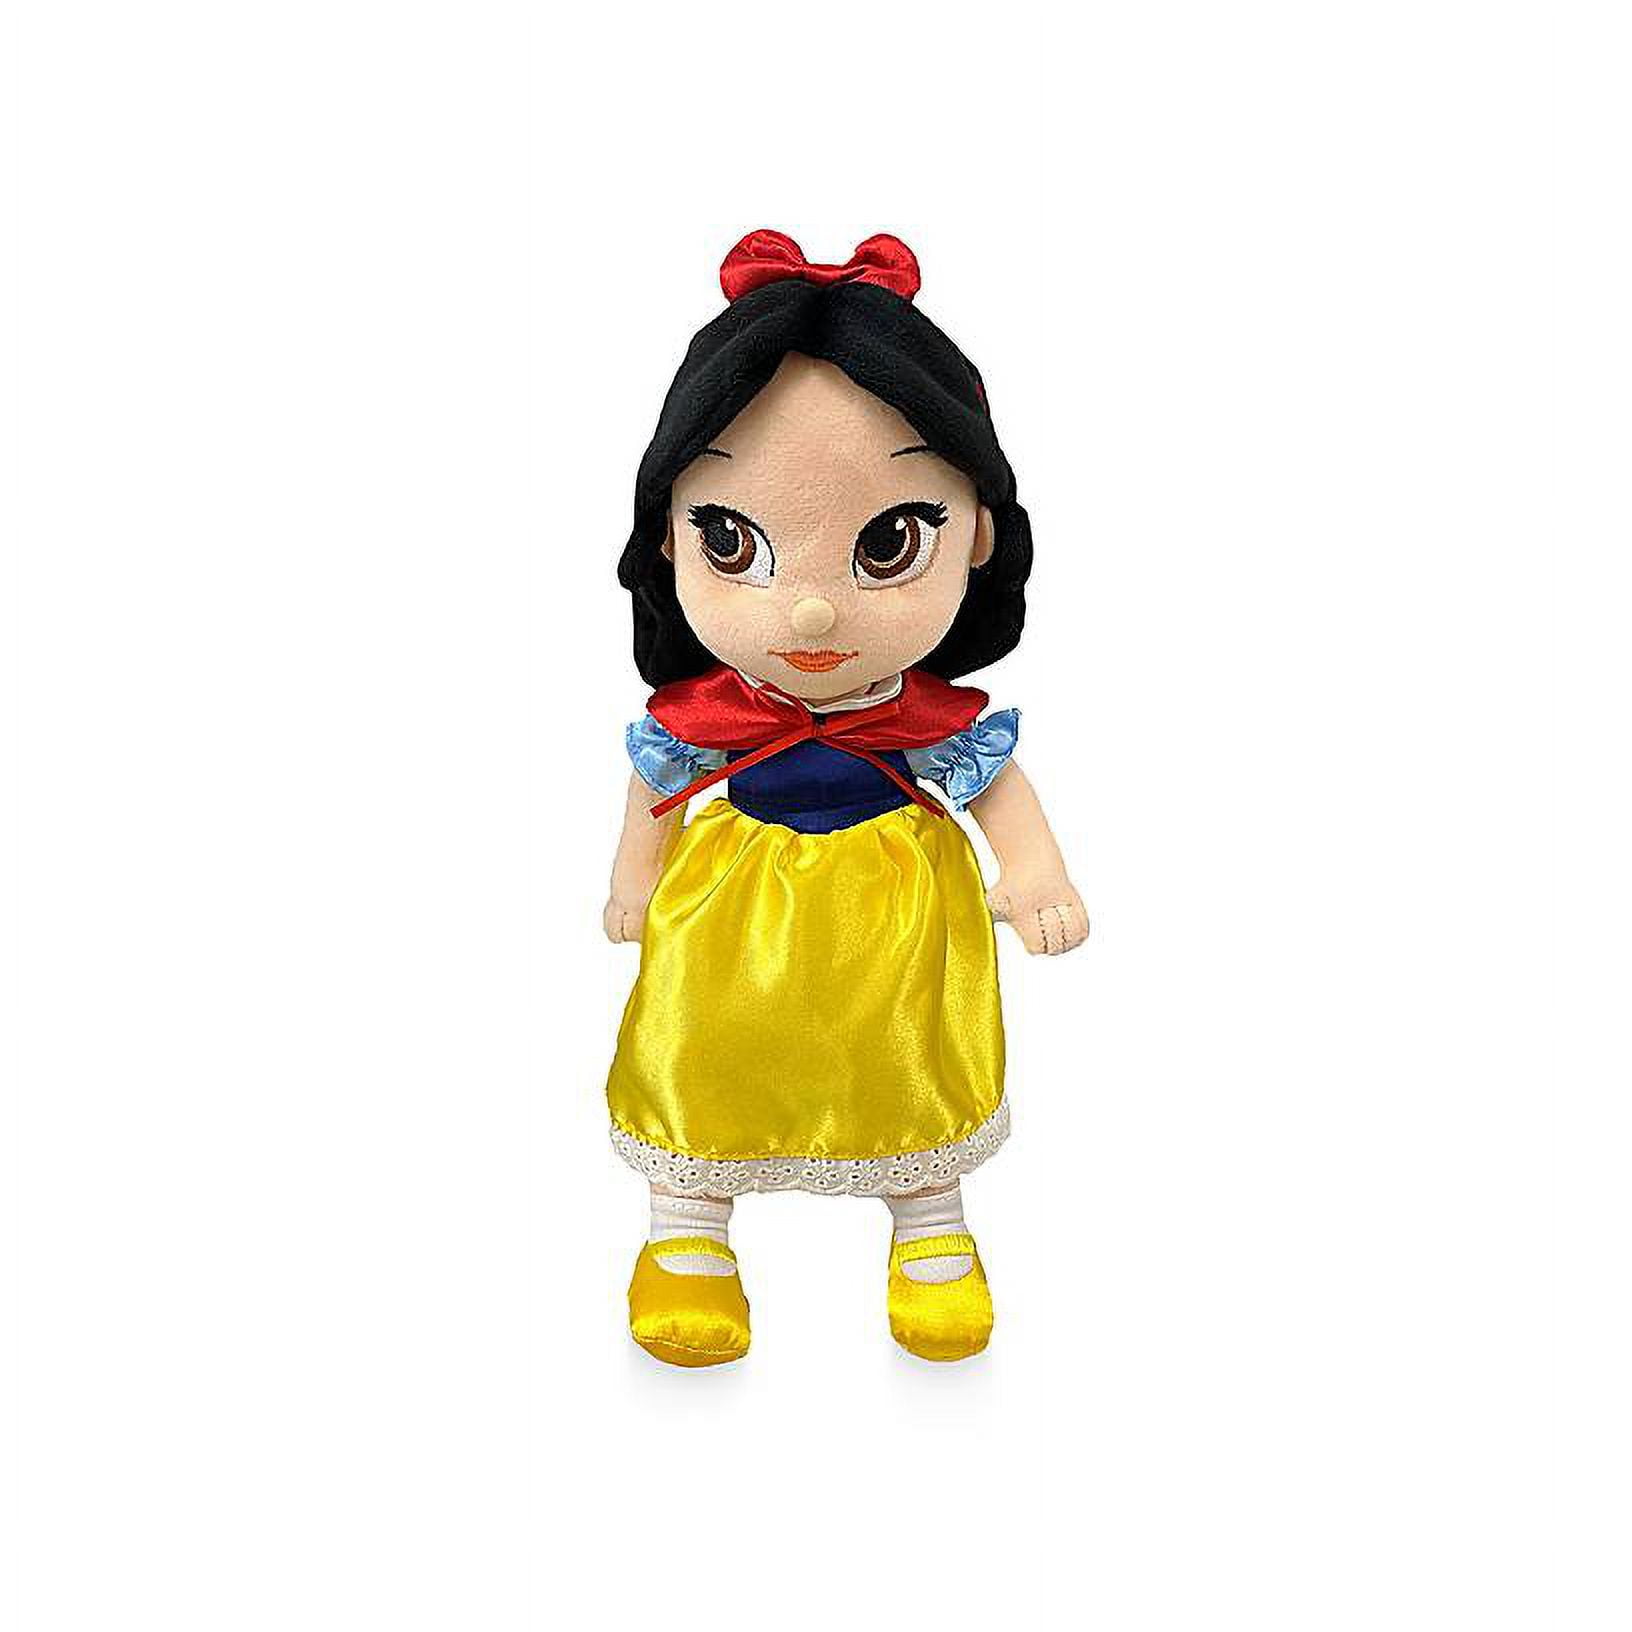  Disney Store Official Animators' Collection Snow White